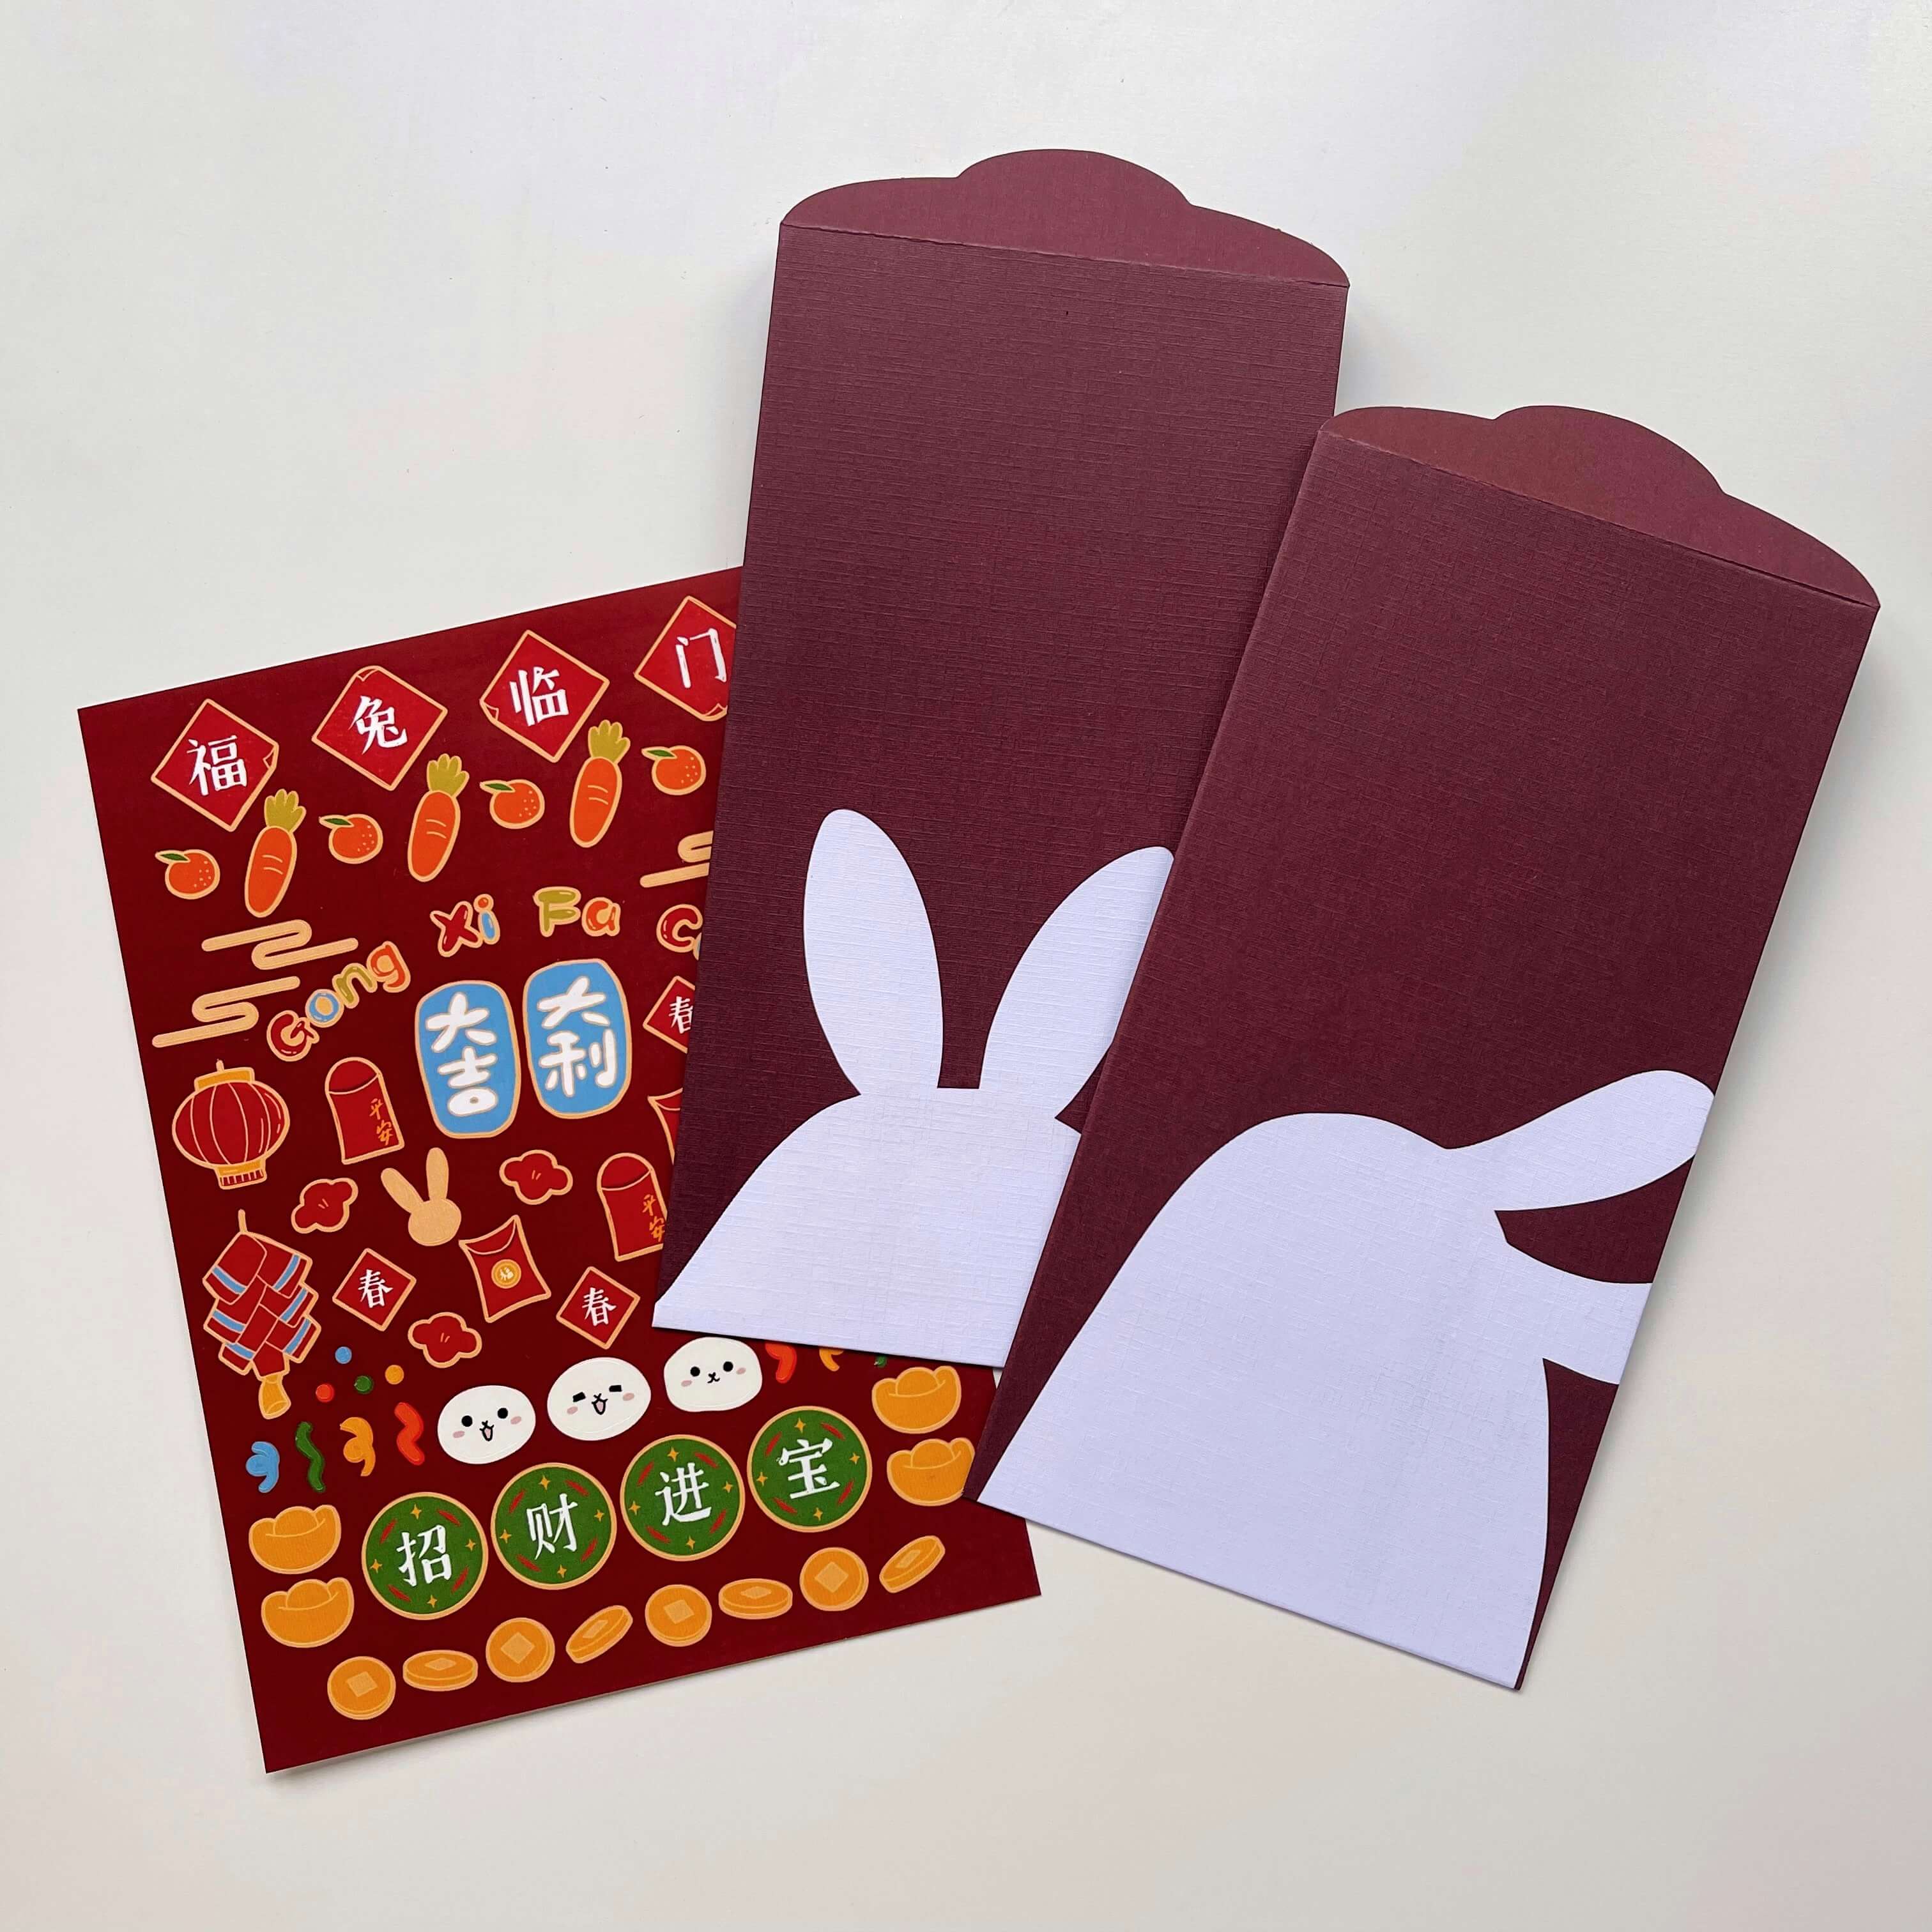 Year of the Rabbit Red Envelopes. Chinese Red Envelopes. Lunar 